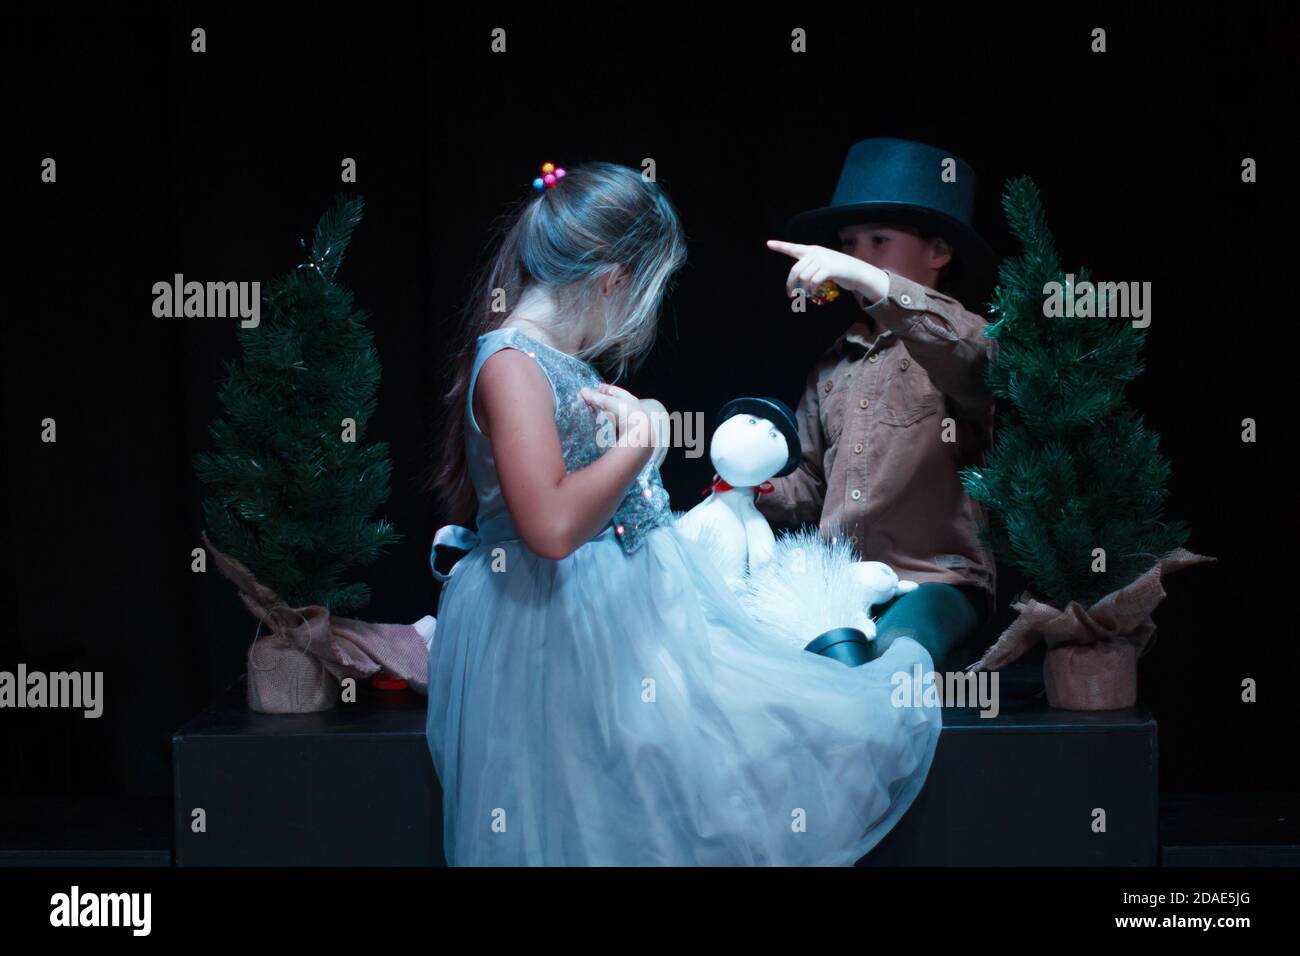 Moscow region / Russia - 01 06 2019: Puppet theater with Moomin trolls. Boy and girl playing with Moomin Troll dolls. Performance with family Moomins Stock Photo